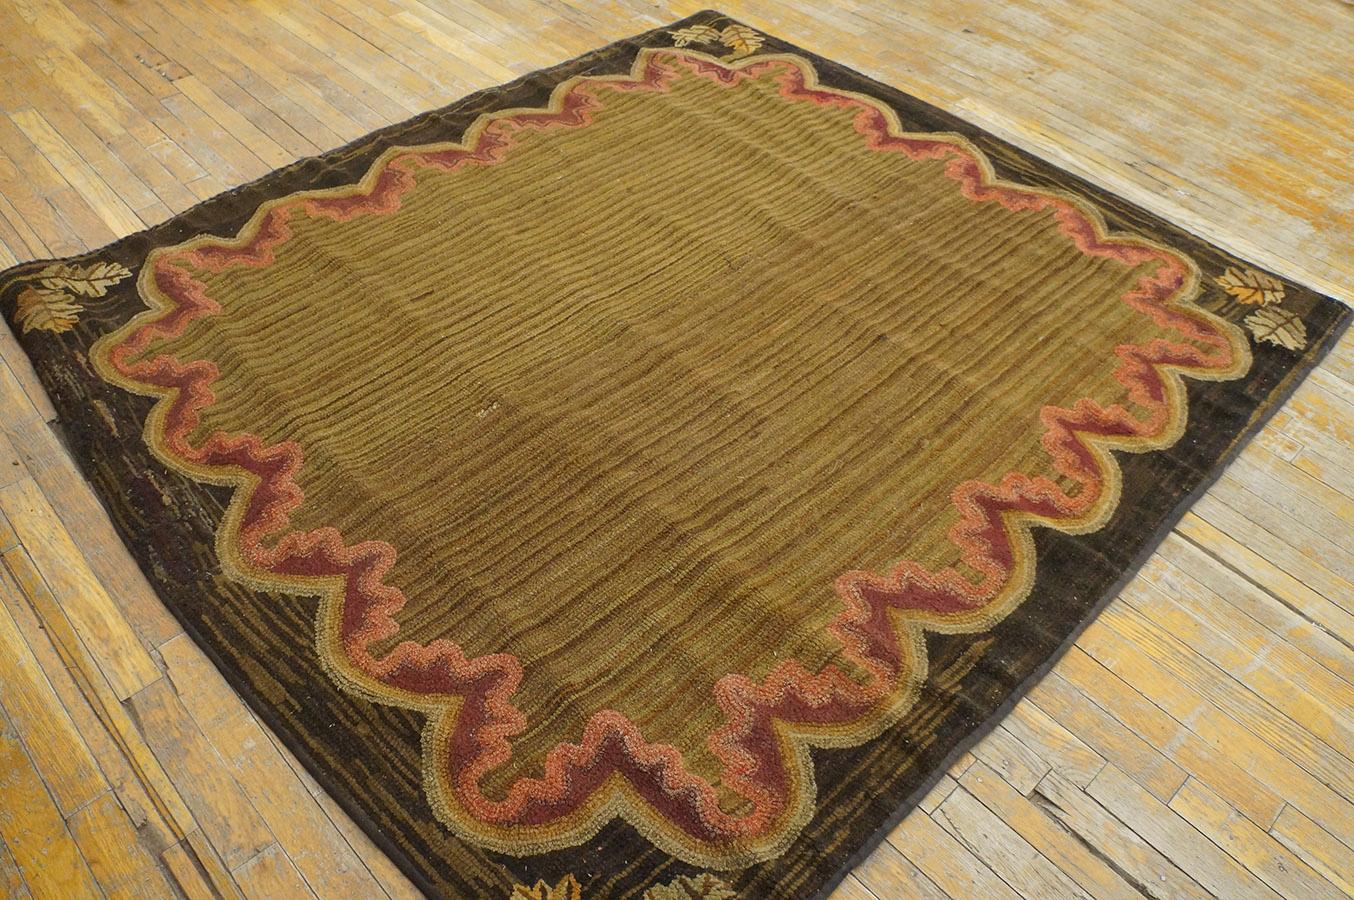 Antique American hooked rug, size: 5'9